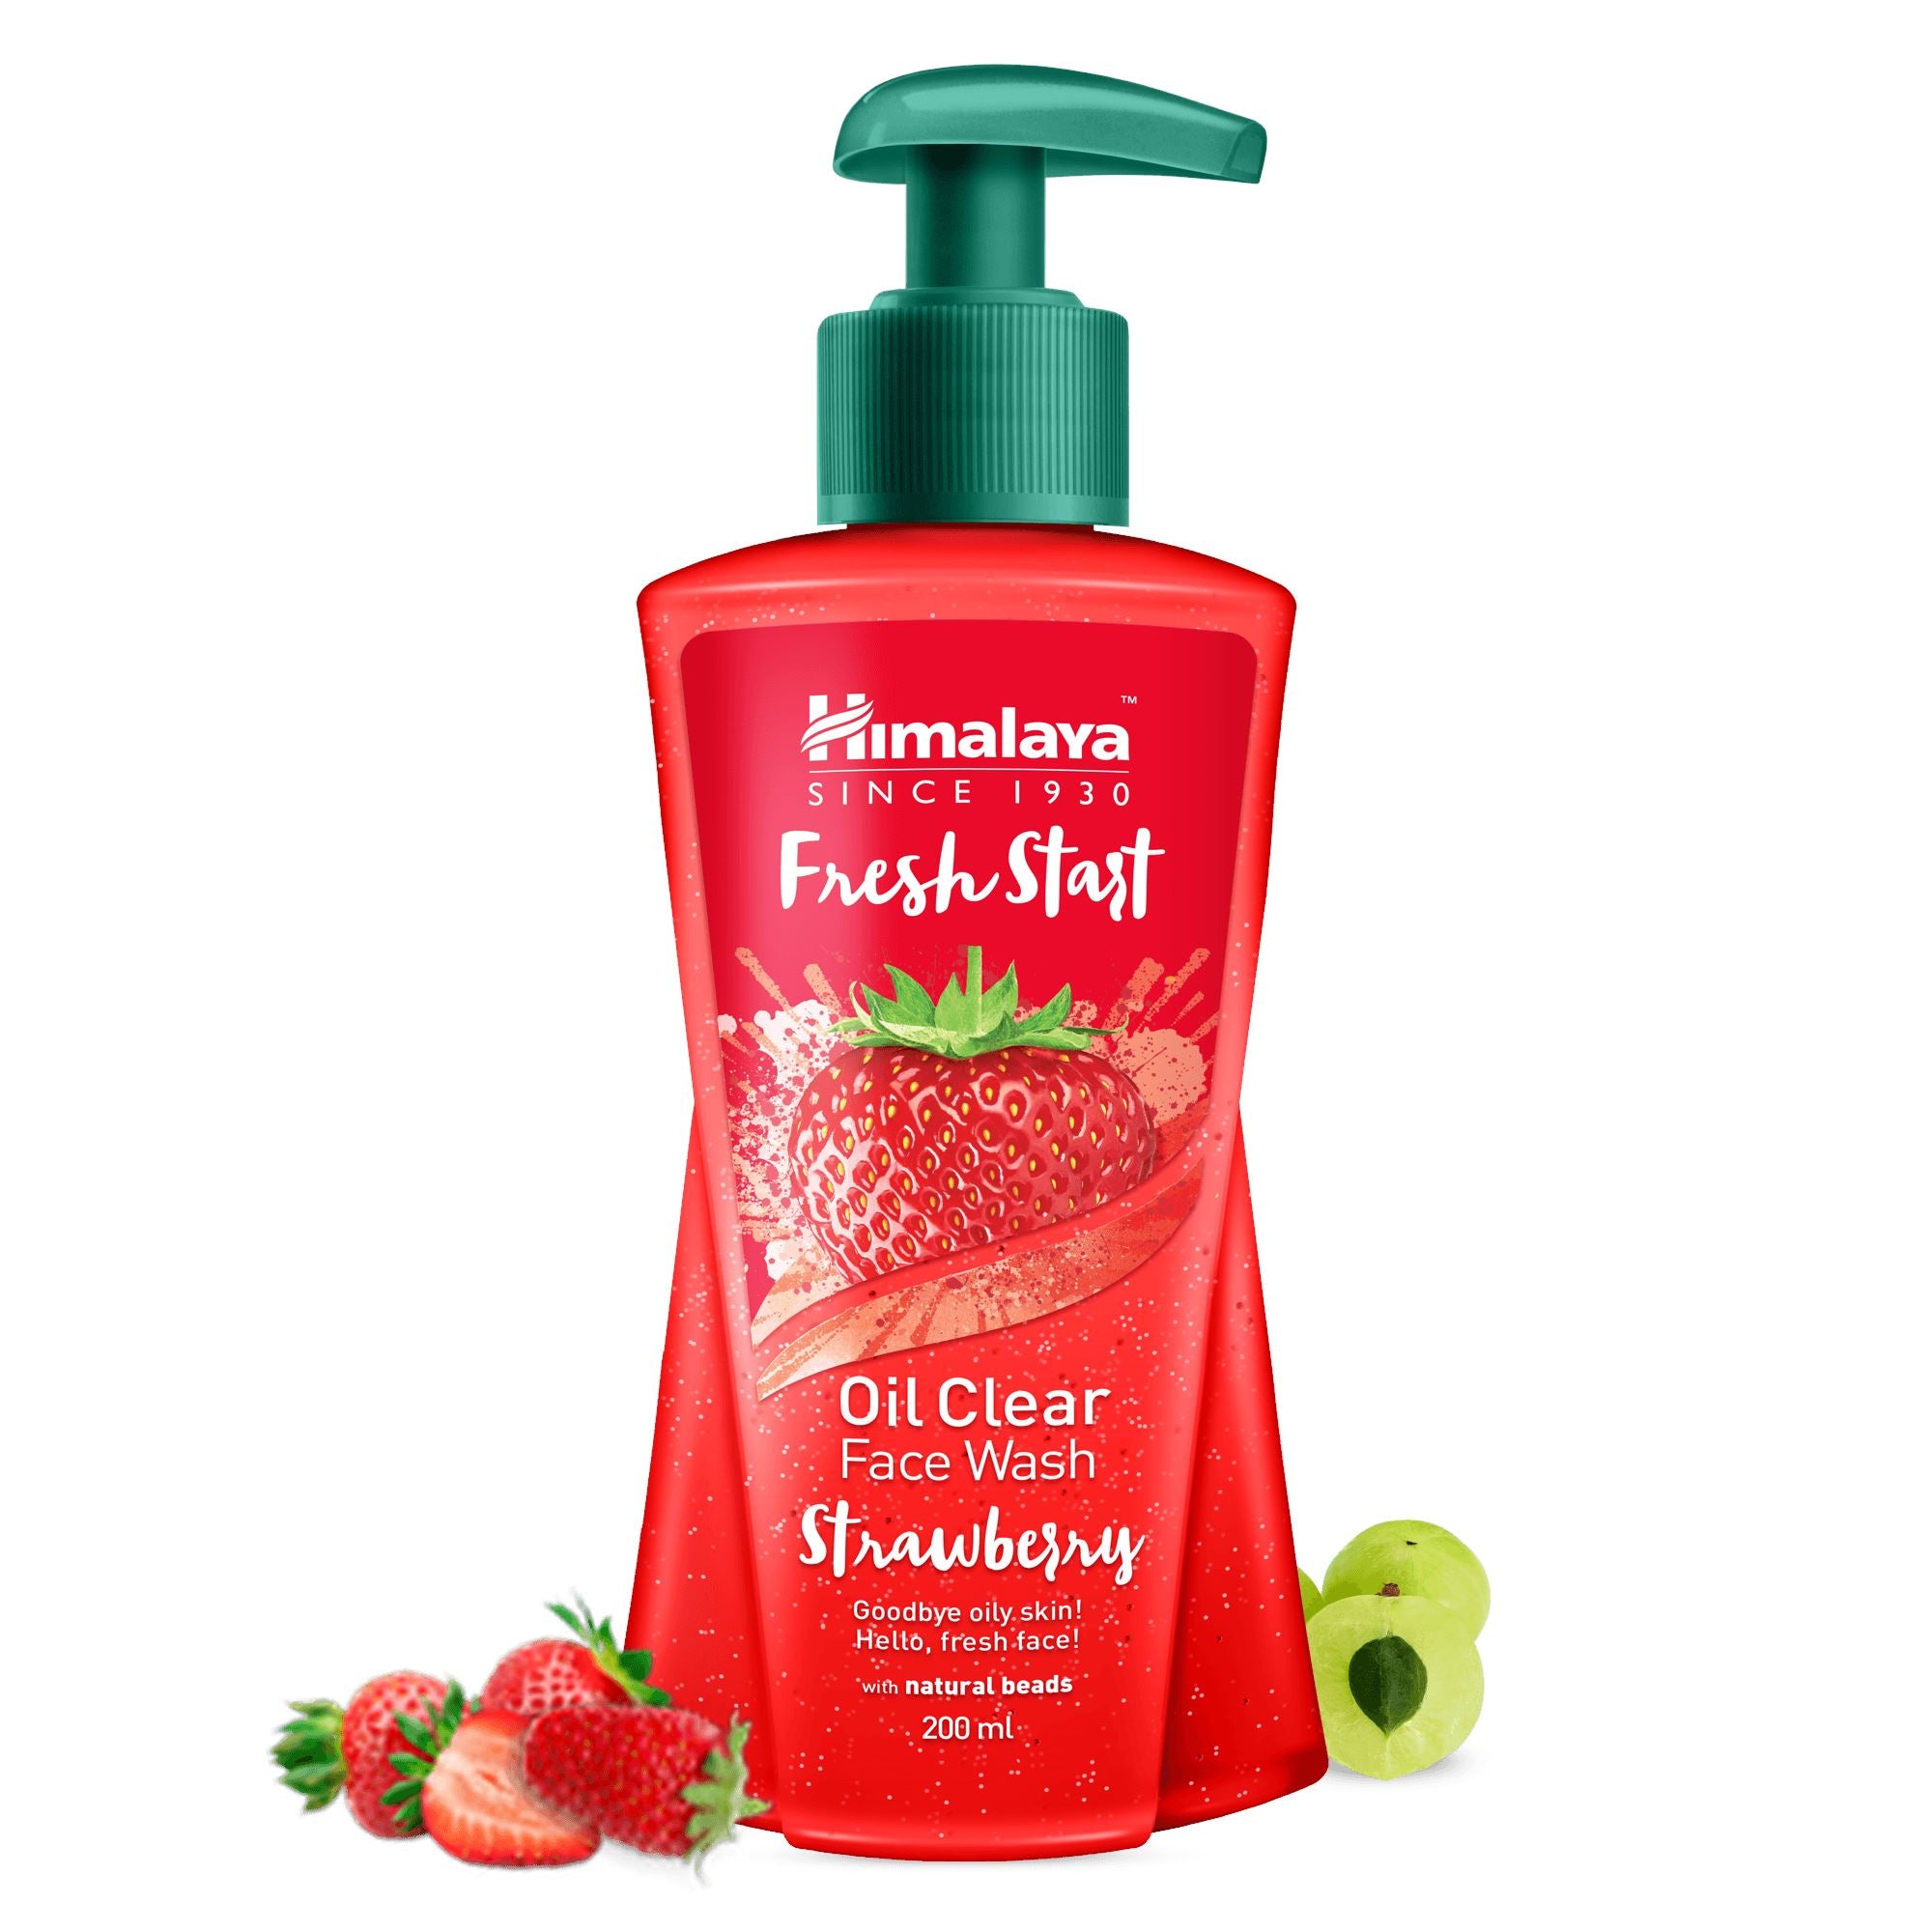 Himalaya Fresh Start Oil Clear Strawberry Face Wash 200ml - Helps remove excess oil, dirt, and impurities